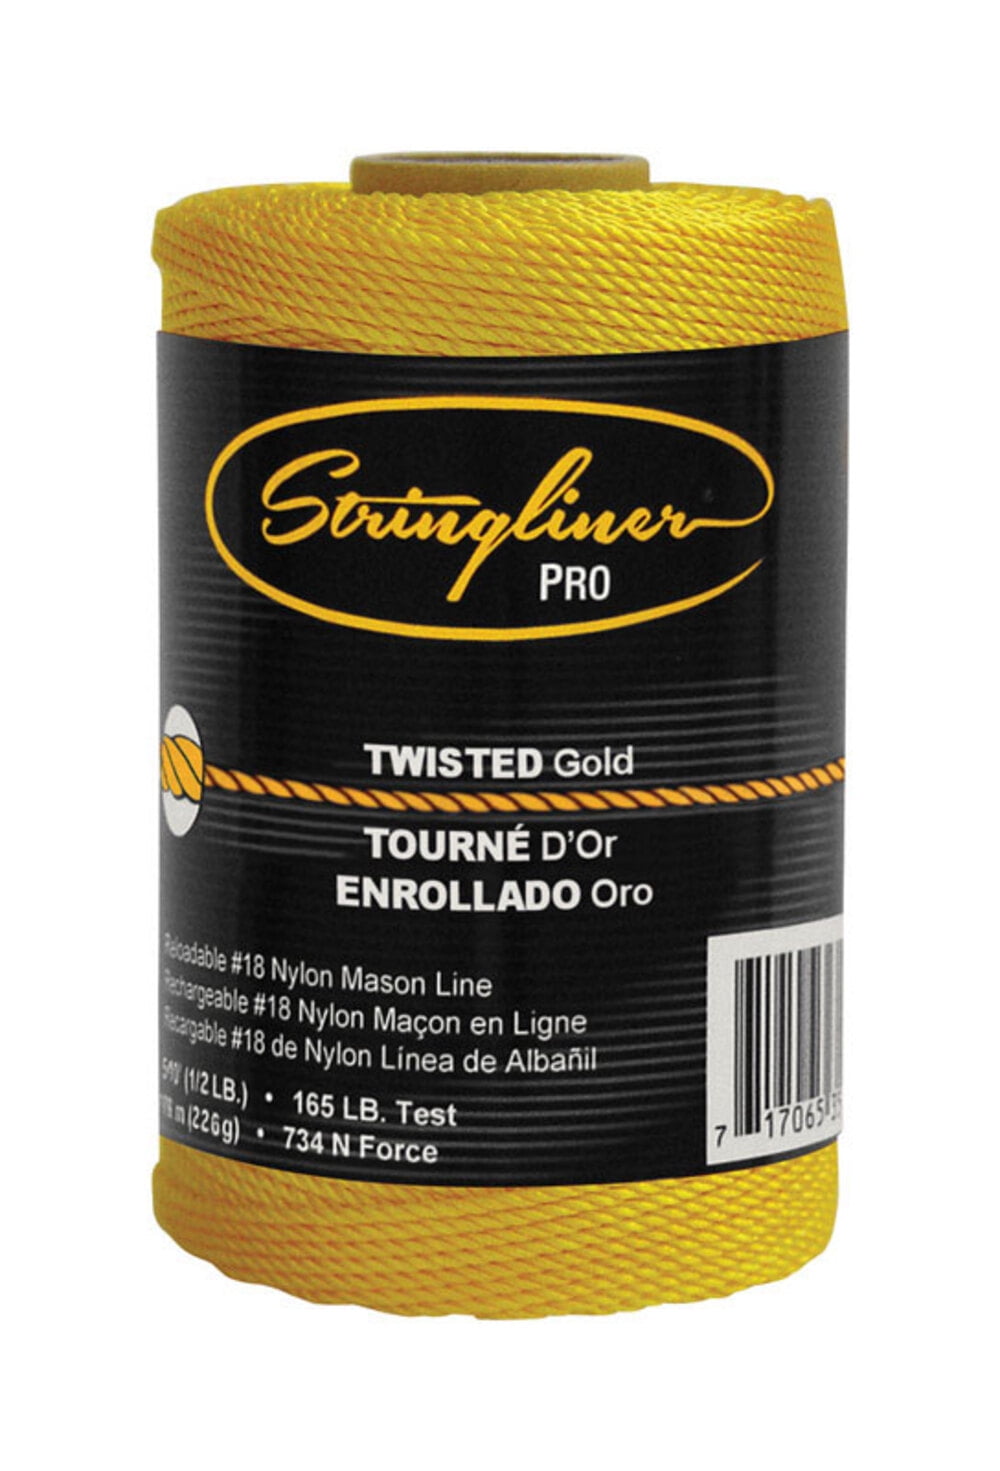 Stringliner 2612844 540 ft. Twisted Gold Mason Line Refill